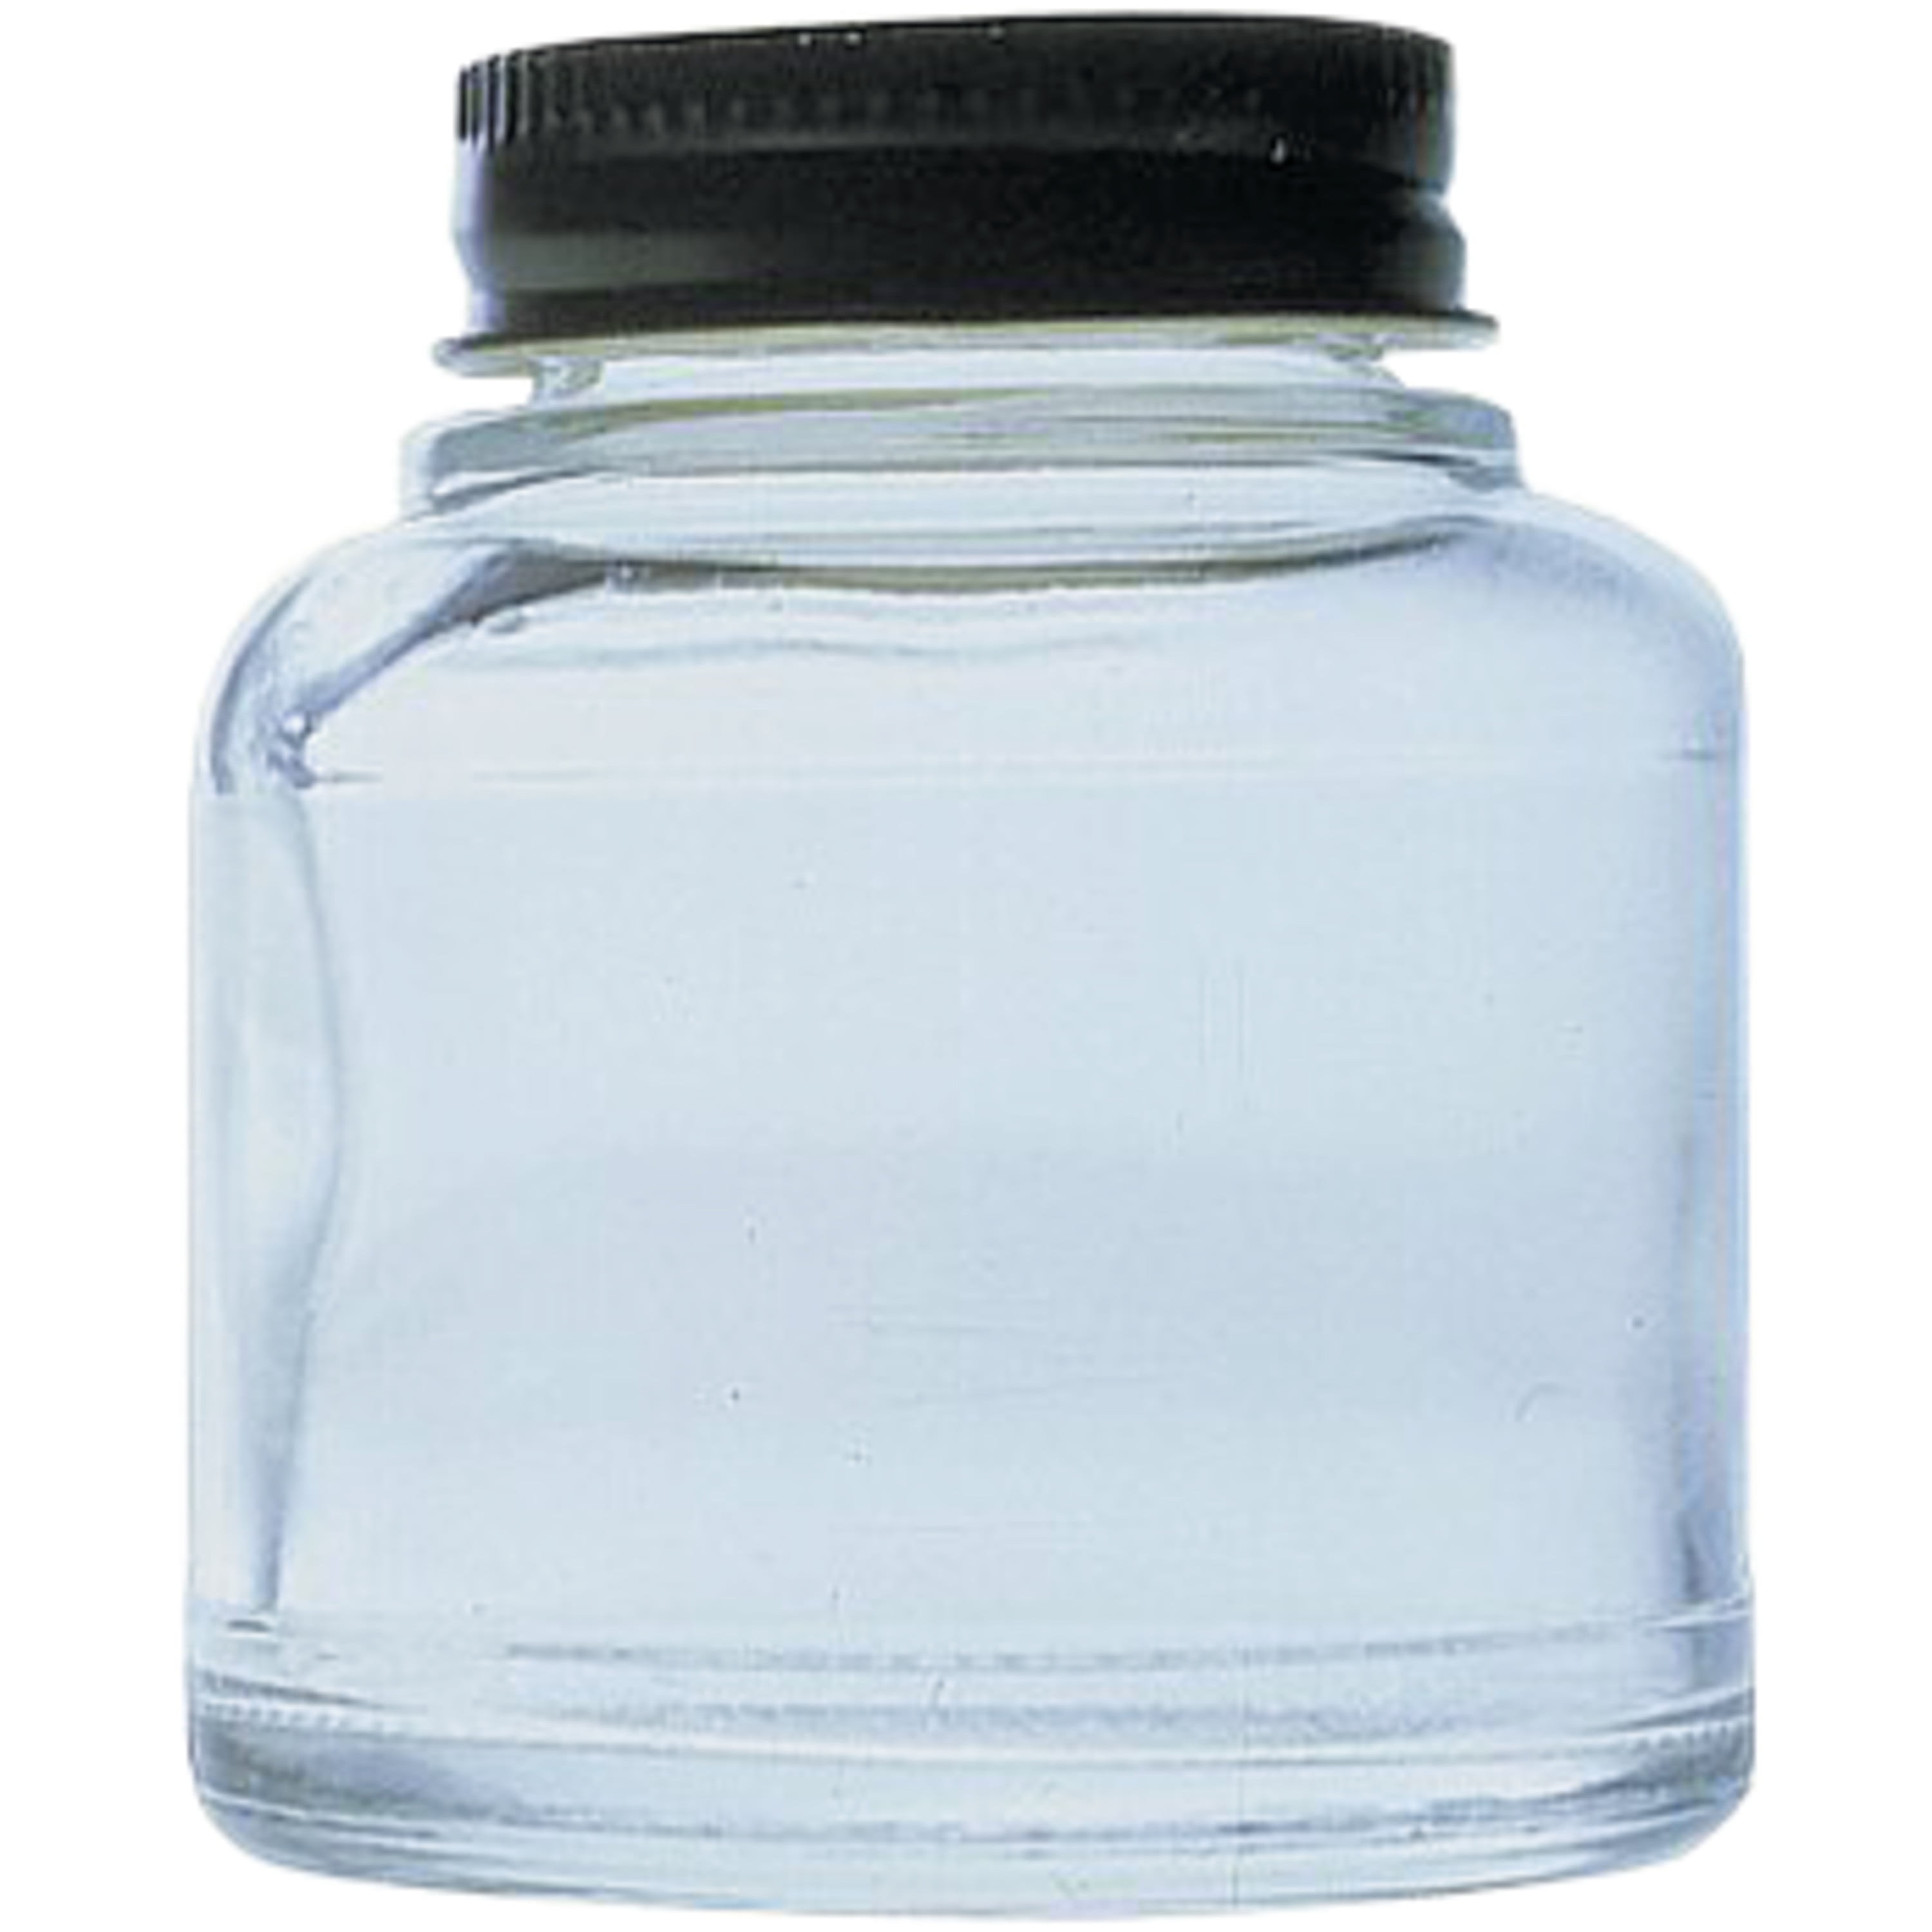 Badger Air-Brush Co 50-0053B 2-Ounce Jar and Cover Box of 6